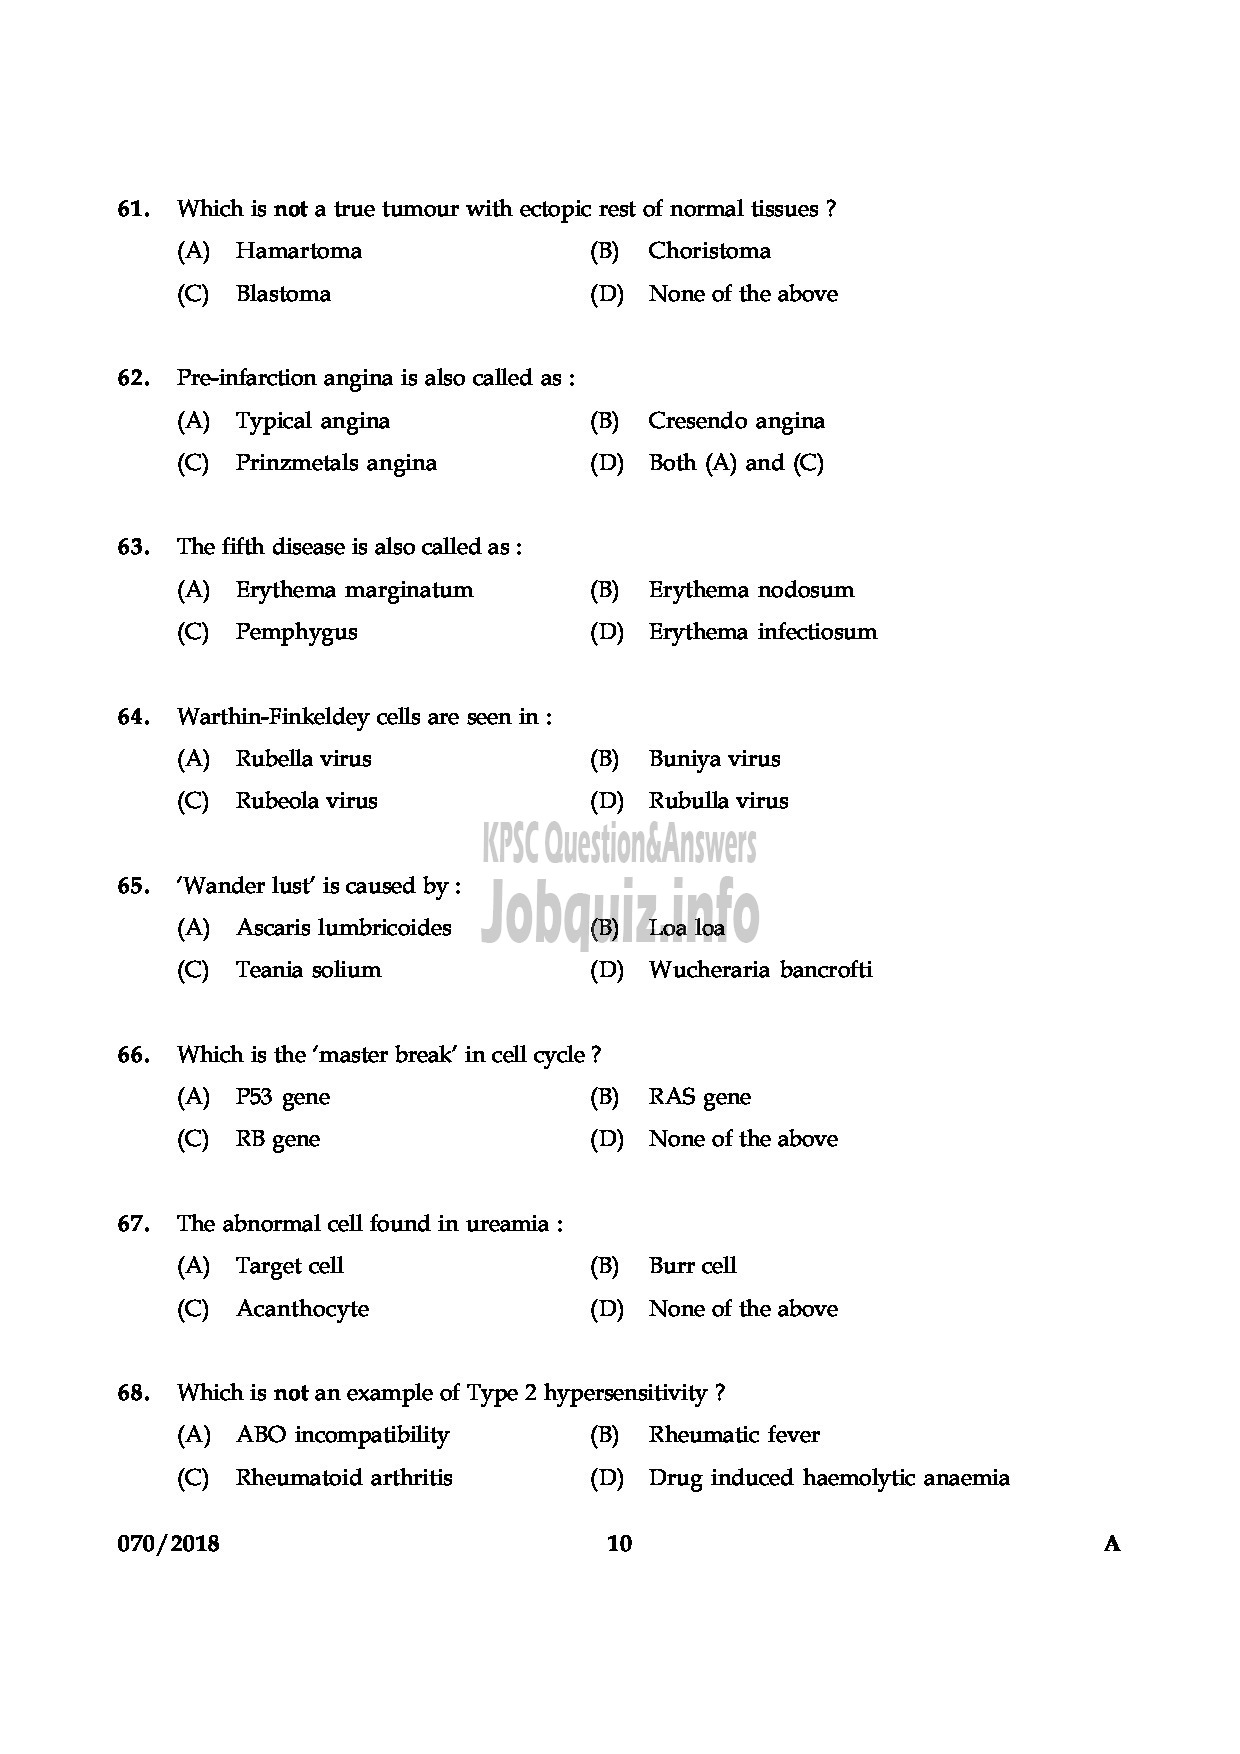 Kerala PSC Question Paper - MEDICAL OFFICER HOMOEO/ ASSISTANT INSURANCE MEDICAL OFFICER HOMOEO HOMOEOPATHY/ INSURANCE MEDICAL SERVICES-10